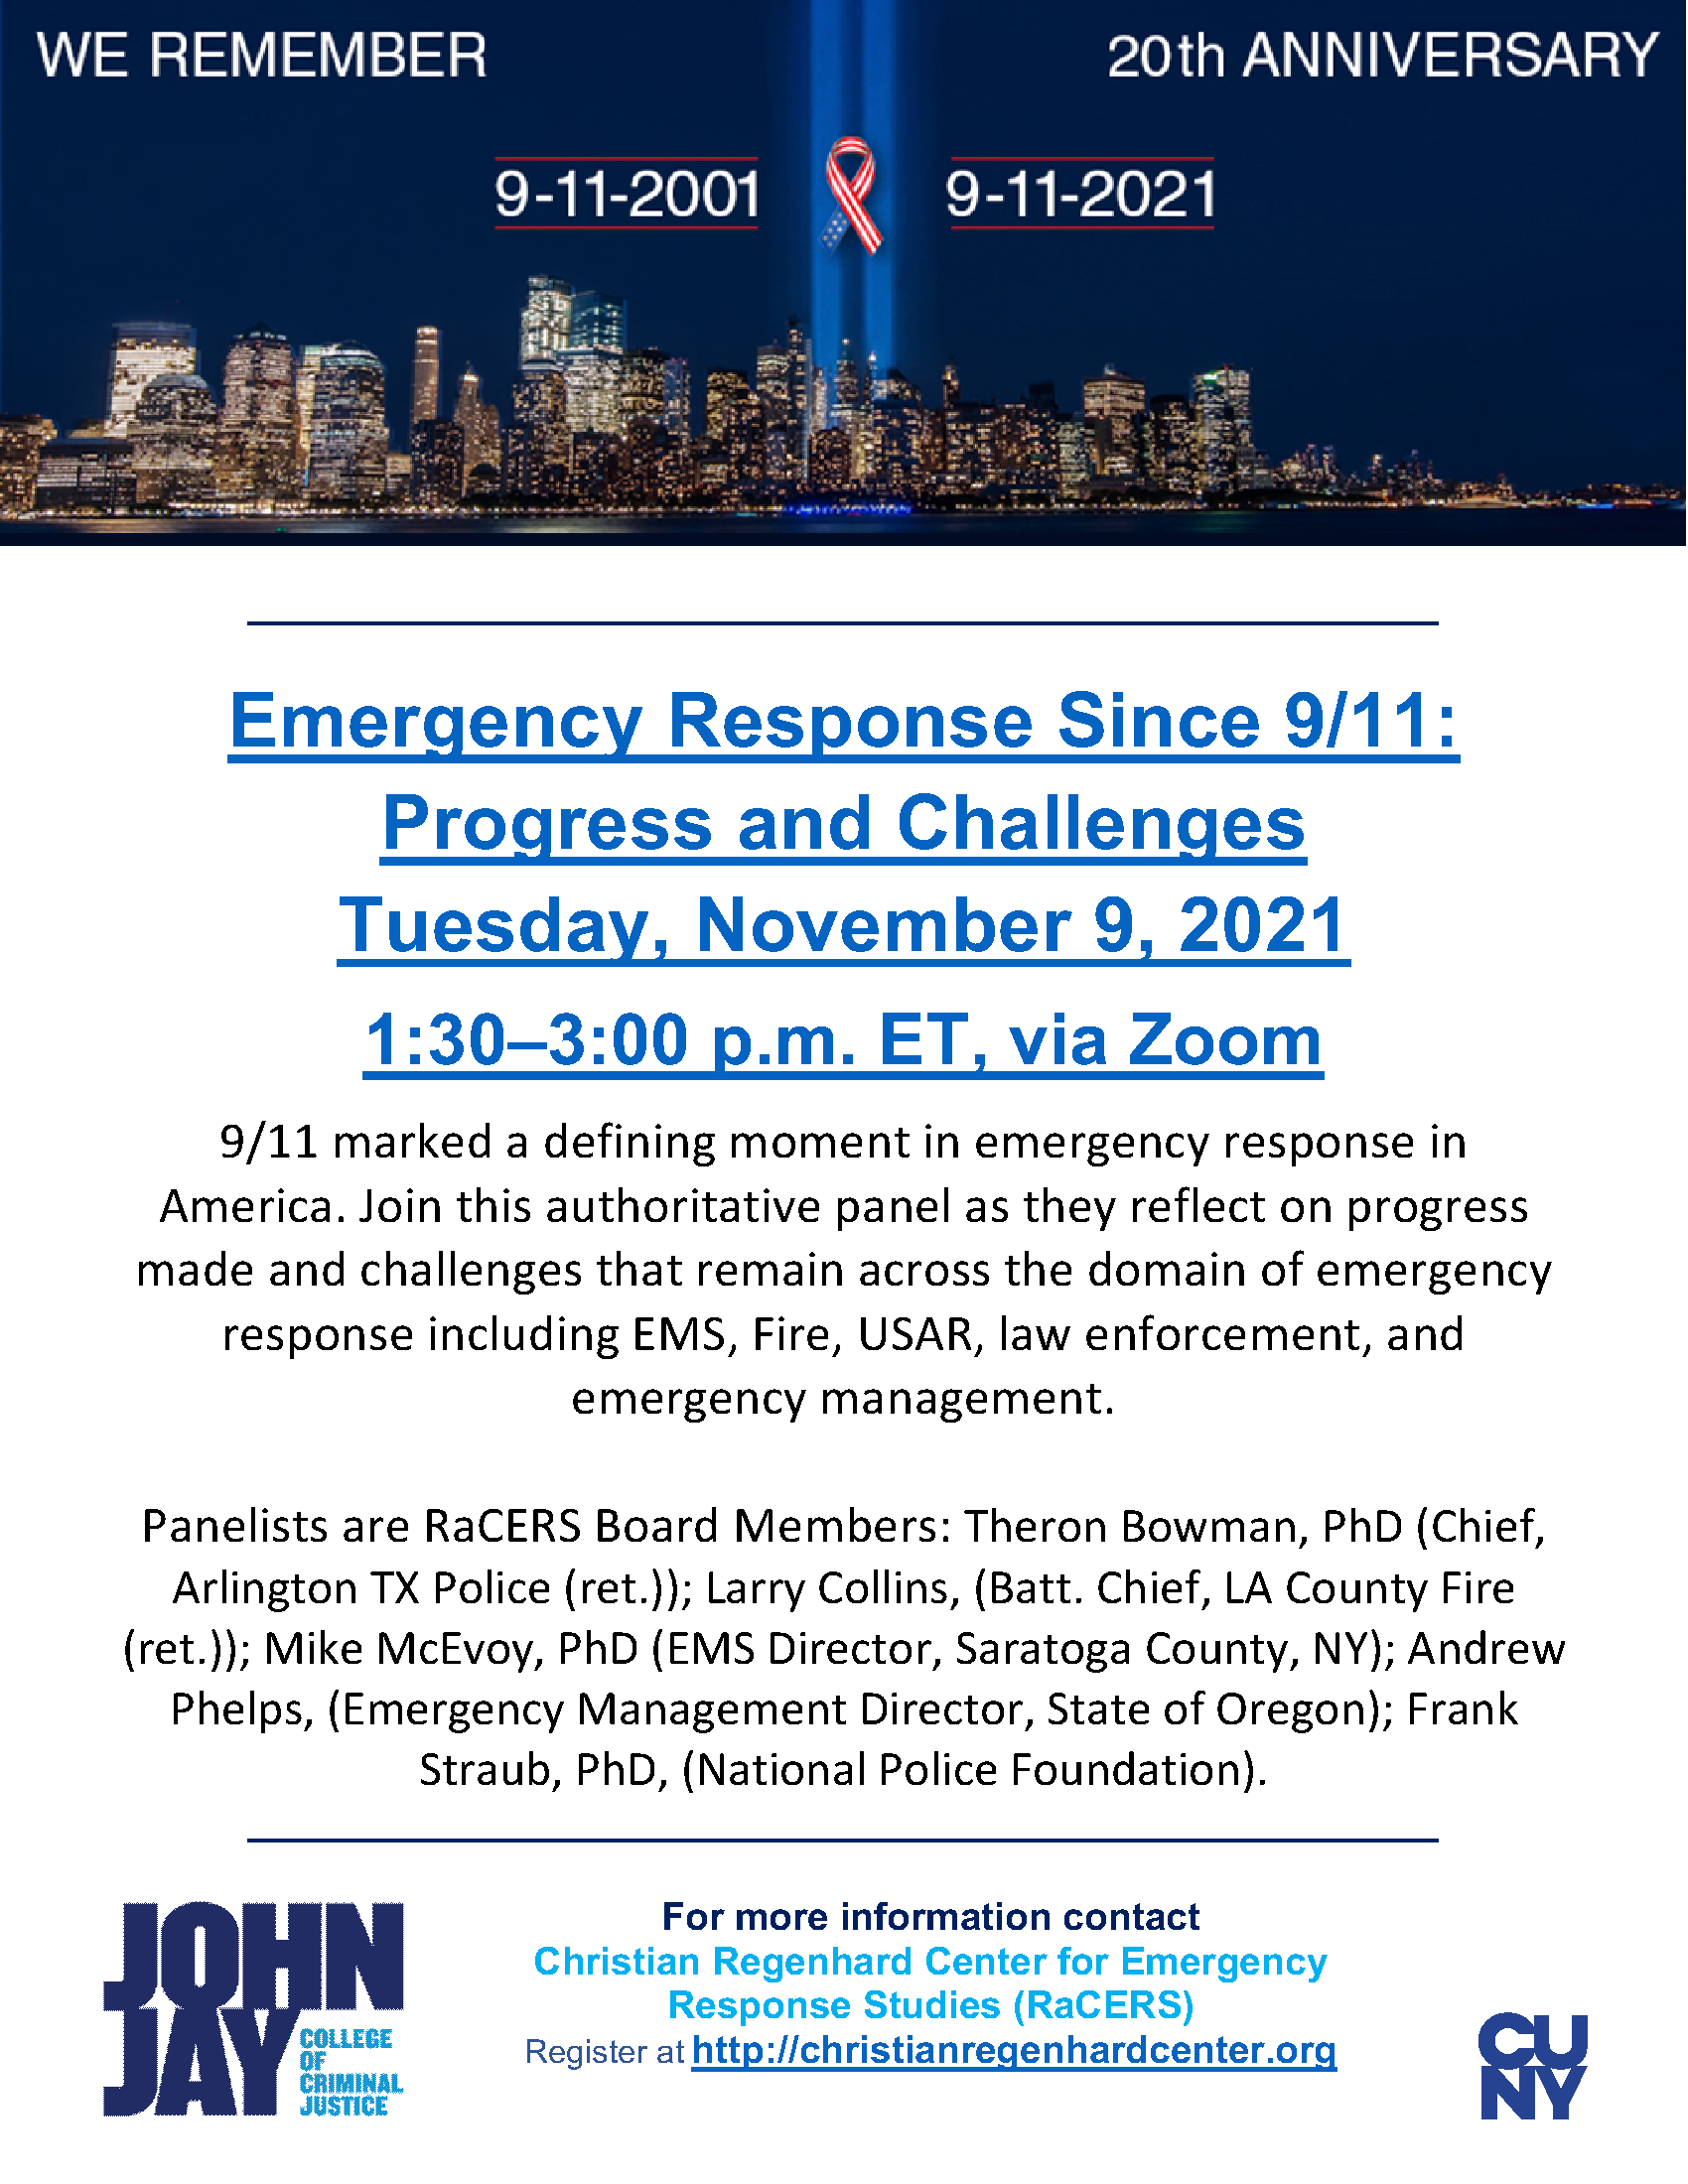 Event Series “9/11 + 20” continues at John Jay College’s Christian Regenhard Center